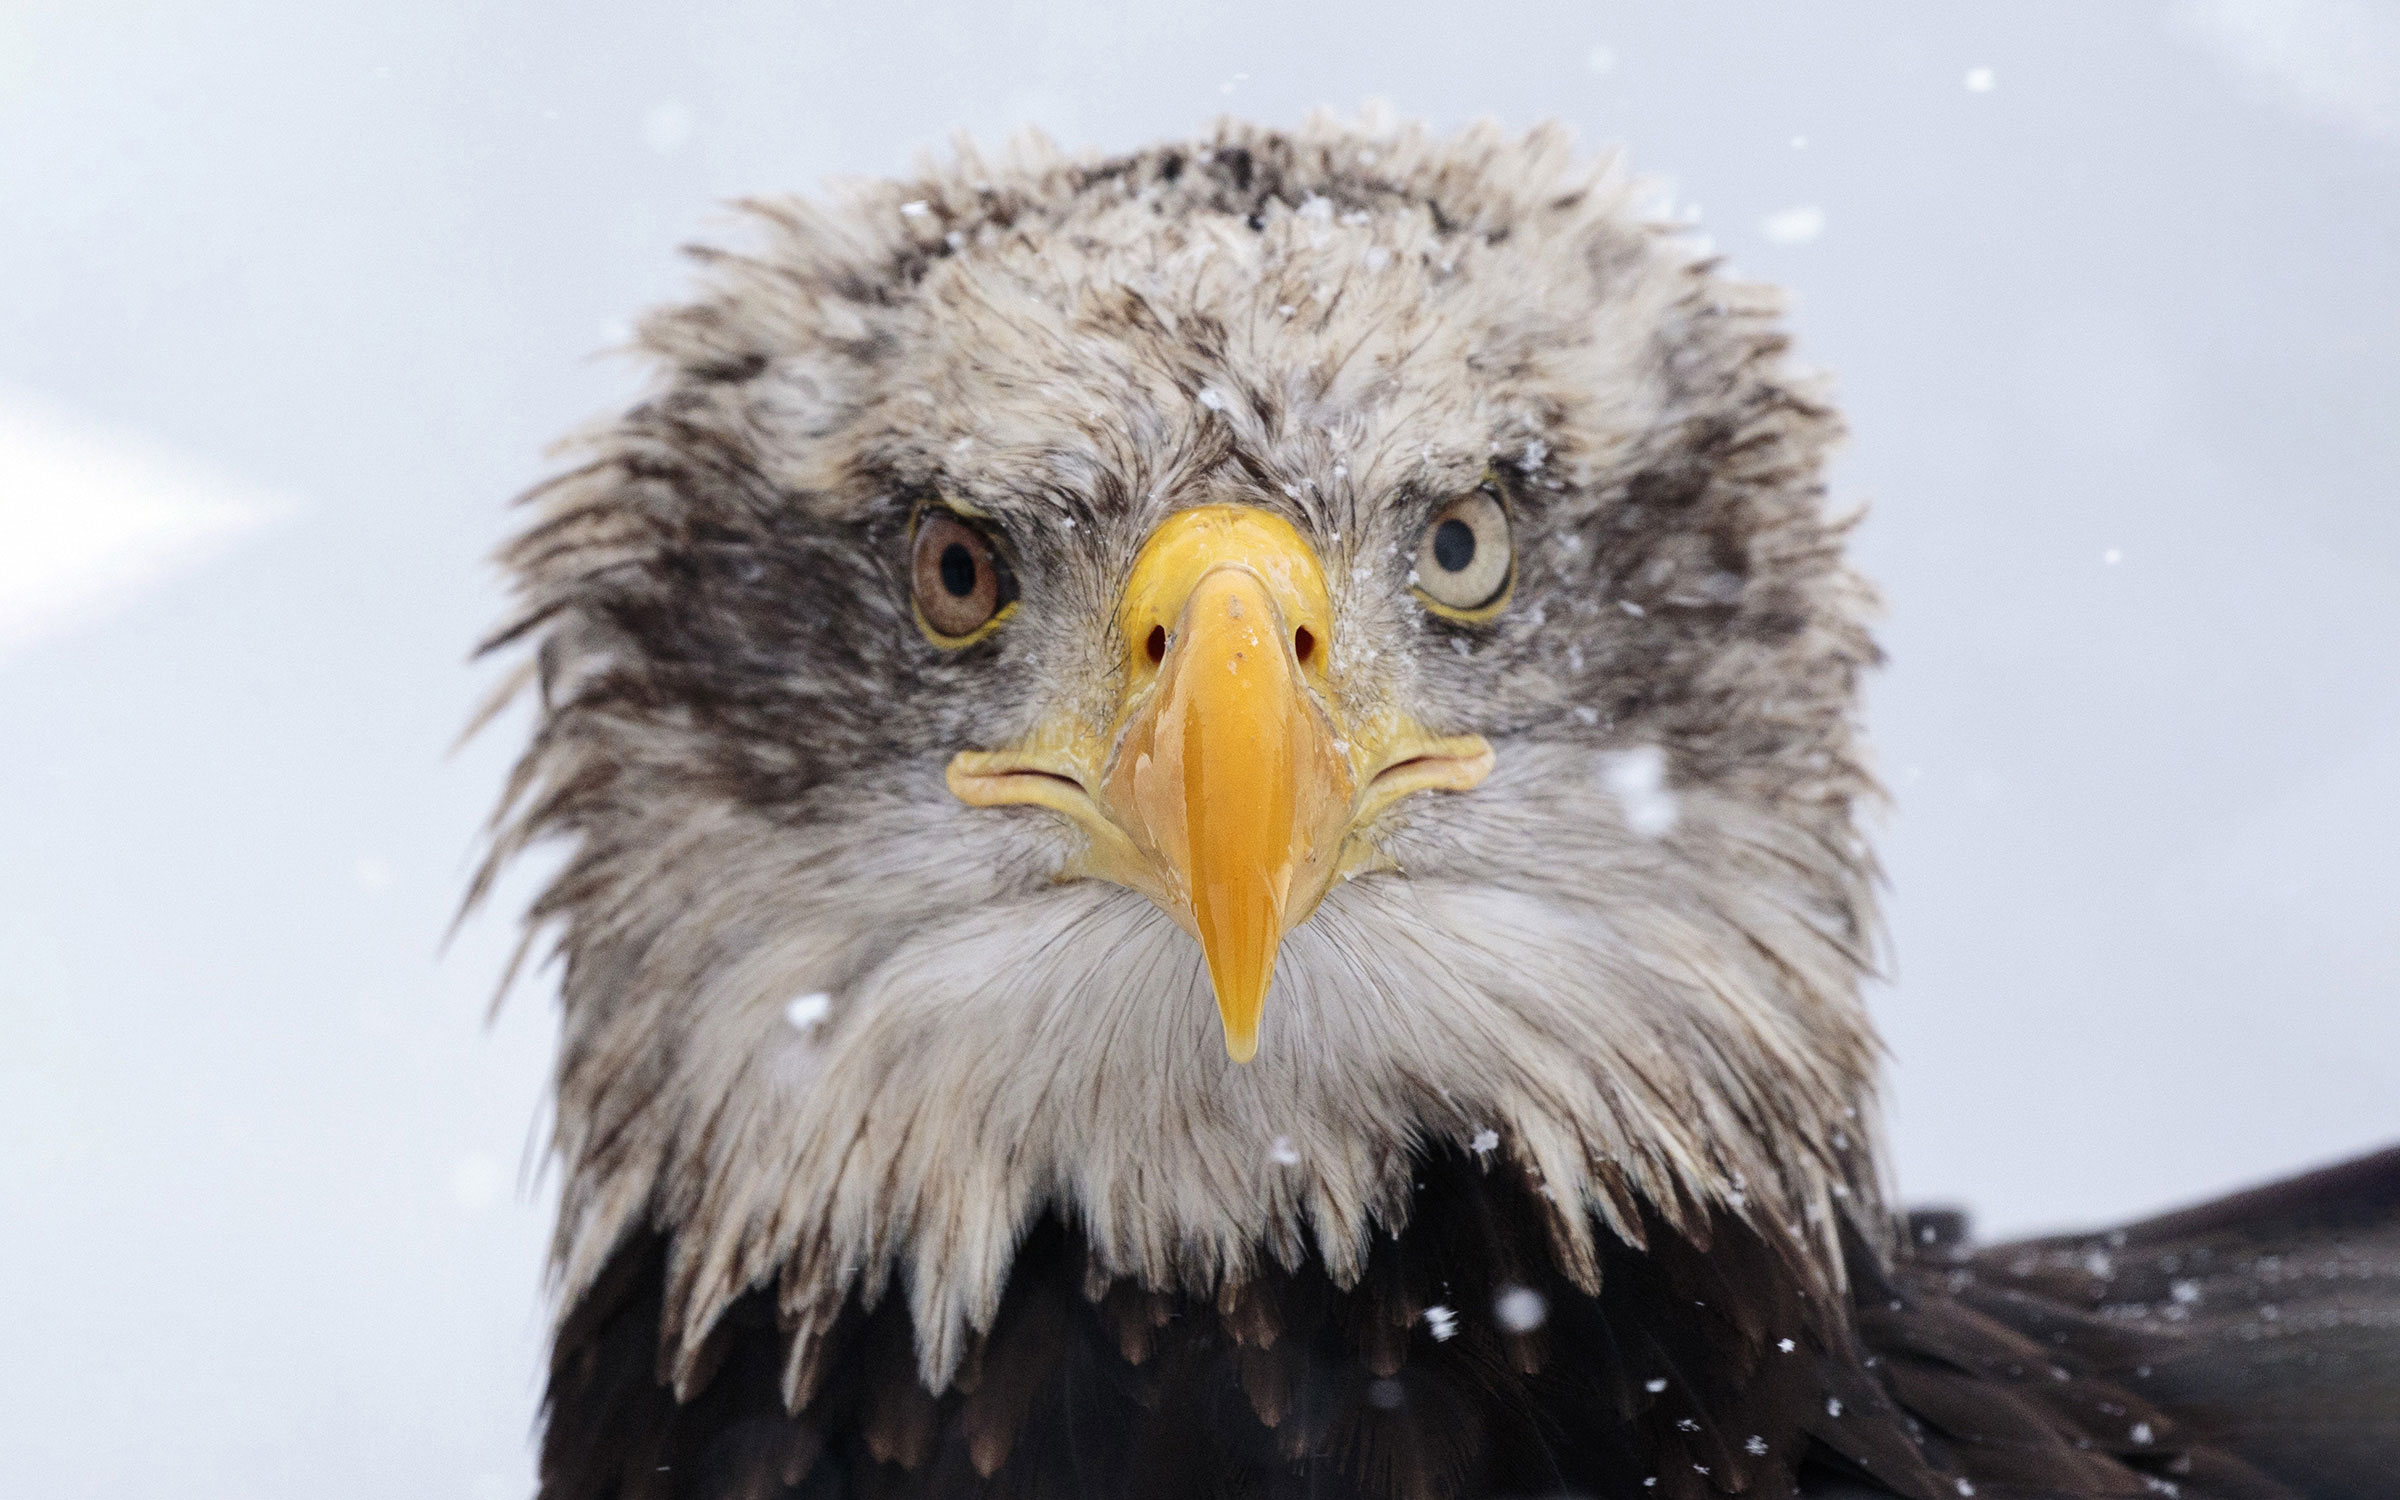 https://tayeblog.net/images/yootheme/science-post-bald-eagle-removed-from-endangered-species-list.jpg